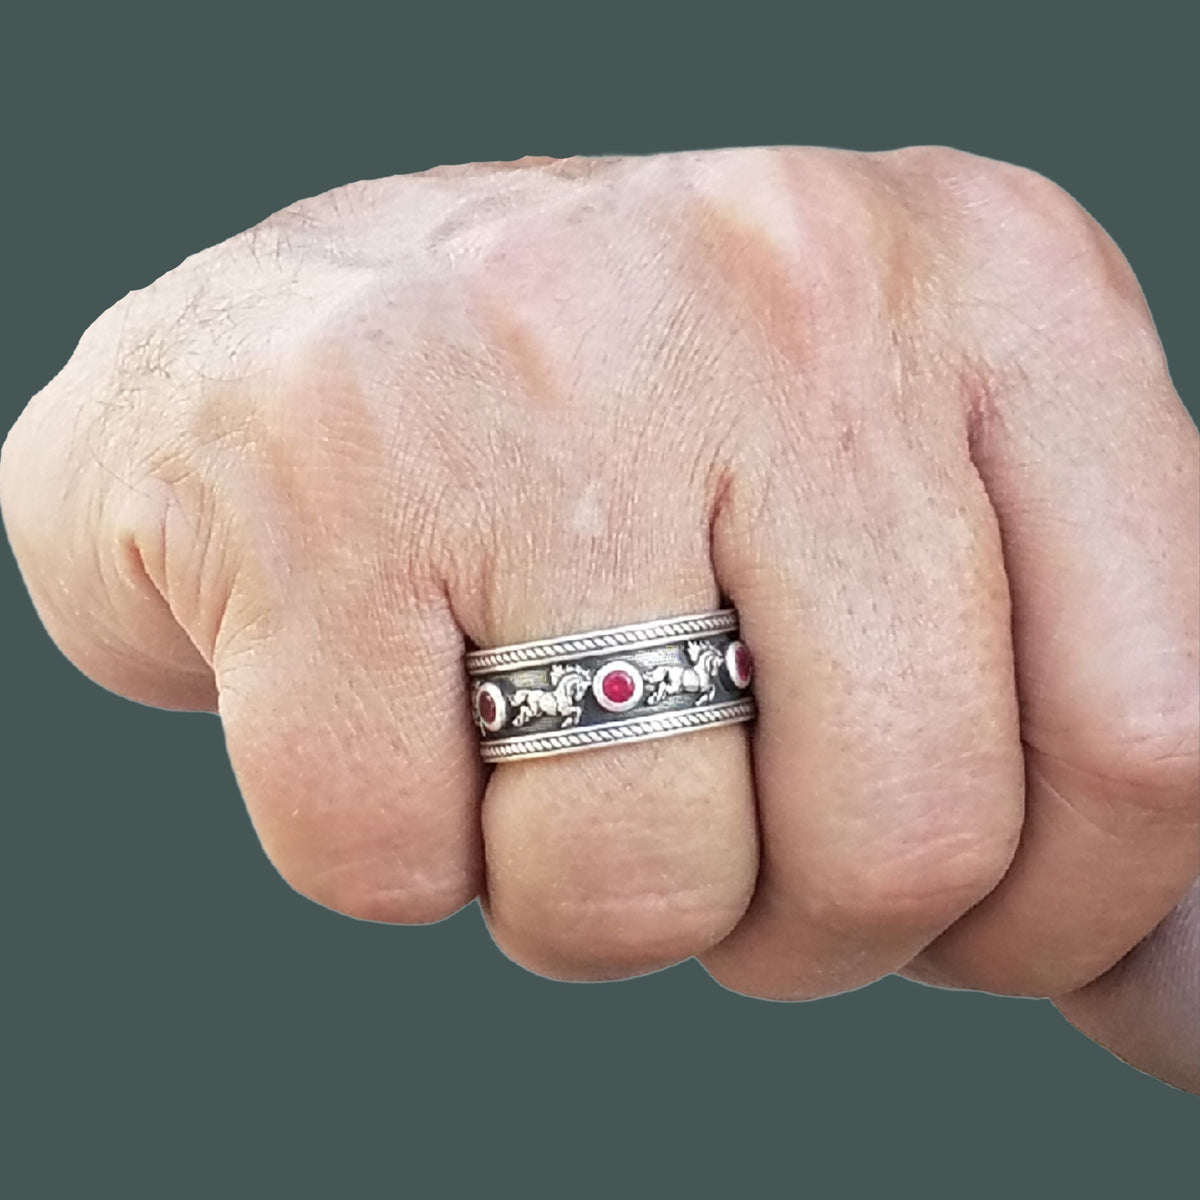 FOAL OF THE FOUR WINDS SOLITAIRE Band Ring in SILVER or CONTINUUM with CHOICE of Six 3mm GEMSTONES - Starting at $199